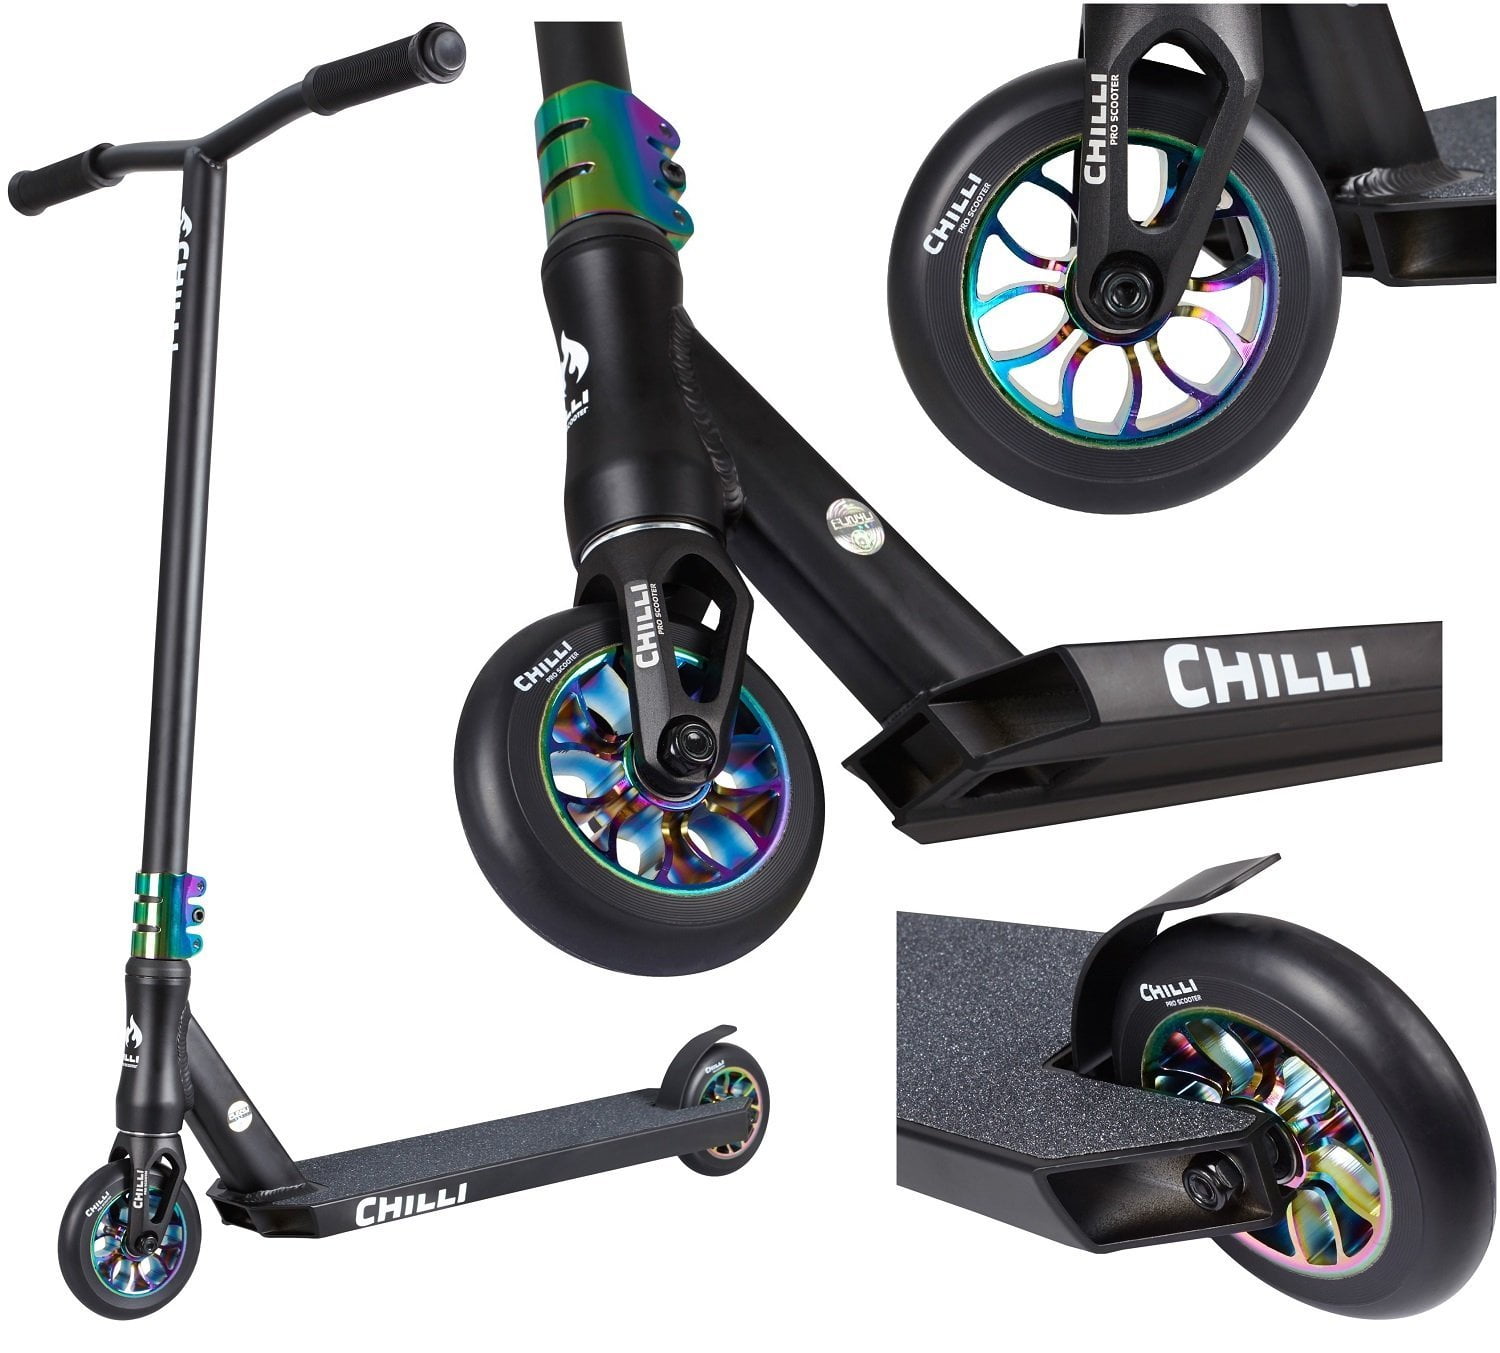 Sanction Superiority manager Chilli Pro Scooter Reaper Oil Slick - Freestyle Stunt Complete Scooters for  kids, teens, adults - Aluminum Deck and Fork, 4130 Chromoly T Bar, 3-Bolt  Clamp, 110mm Urethane Wheels - Walmart.com